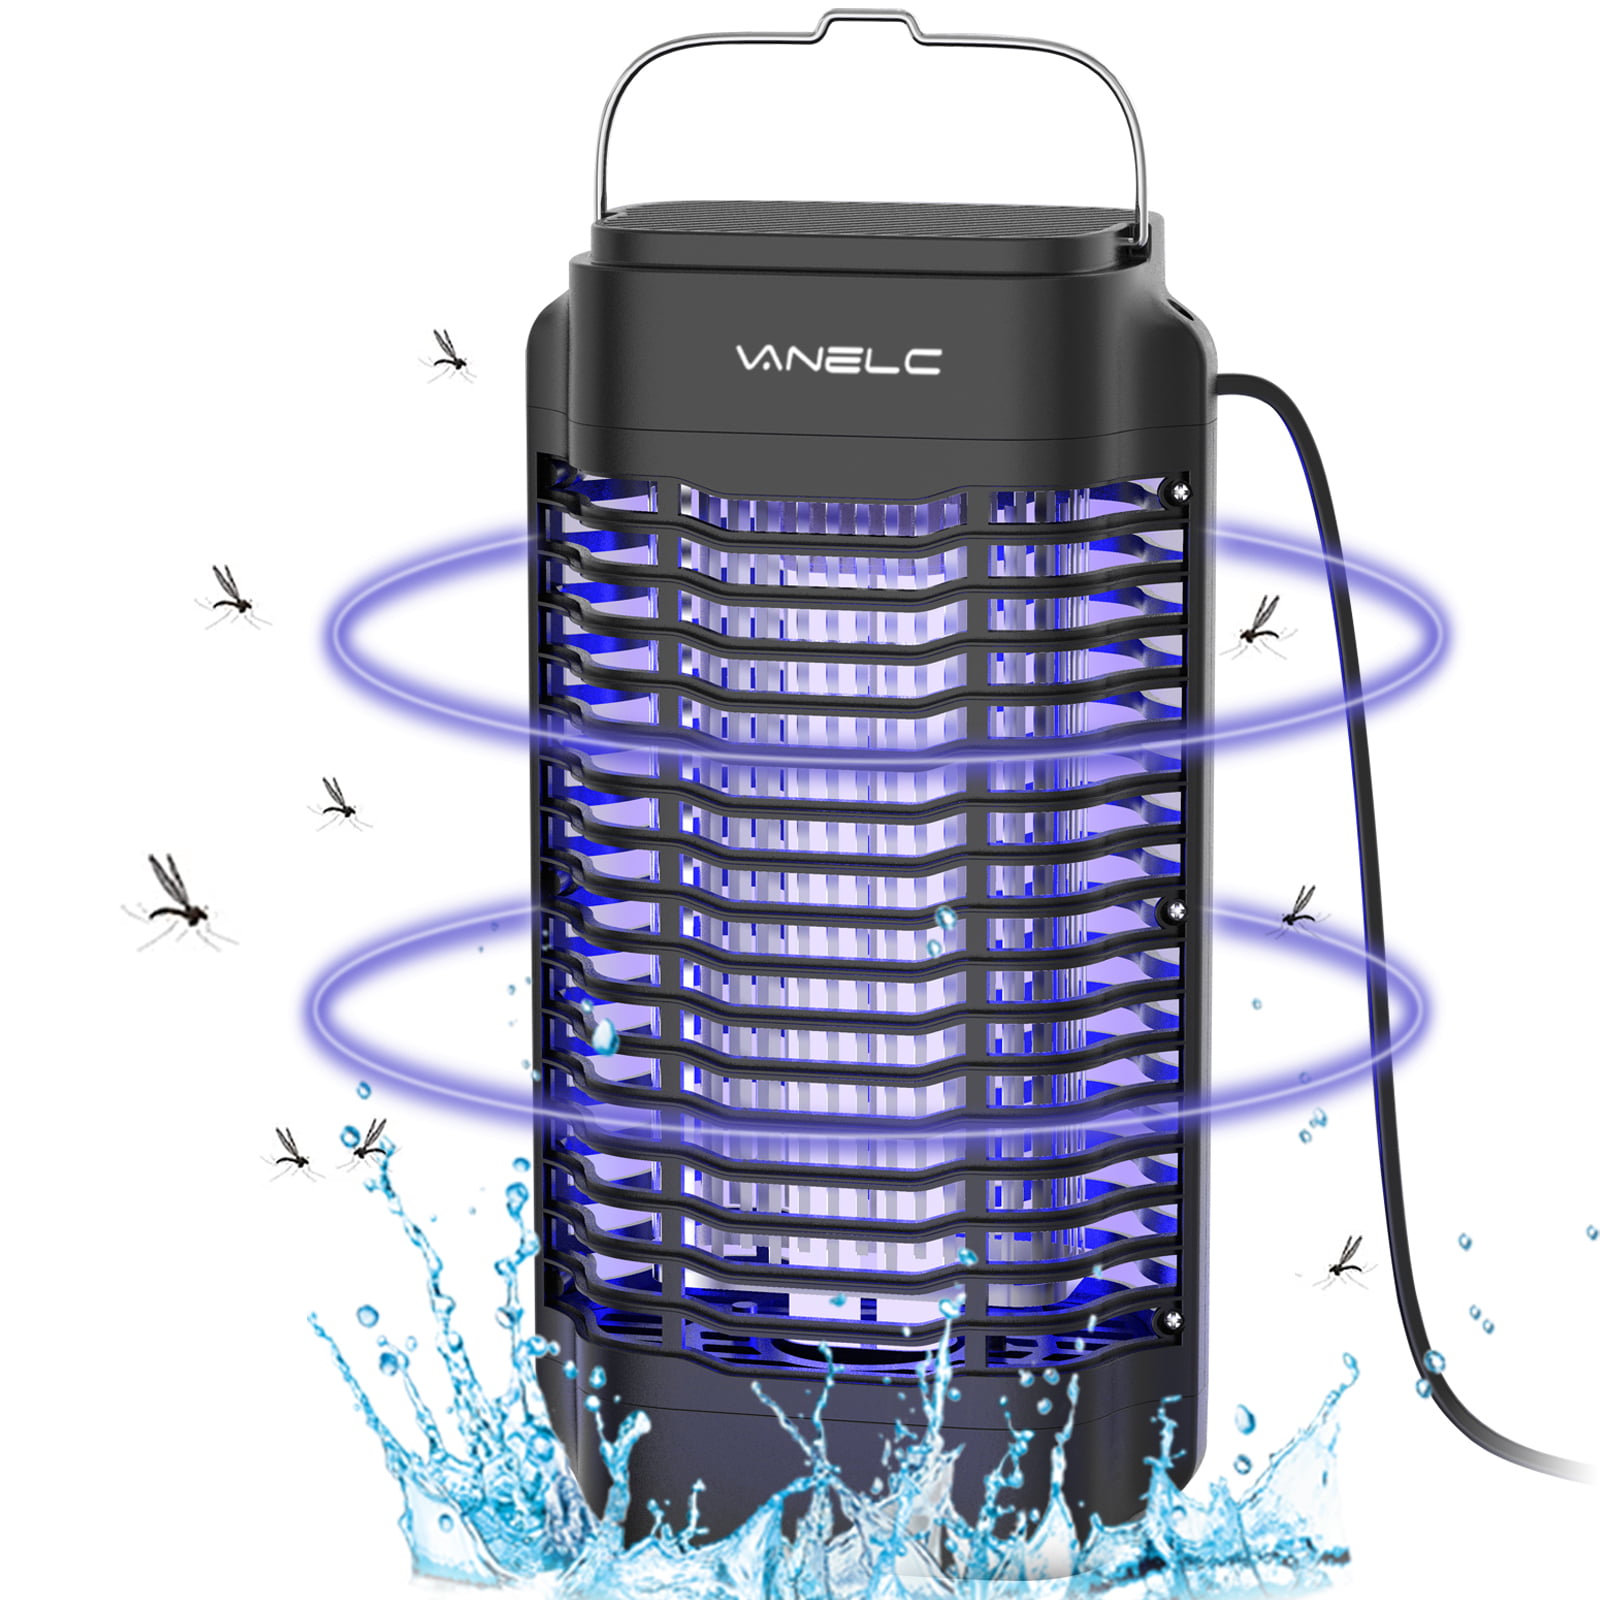 Details about   Flowtron Electronic Mosquito Killer 1.5 Acre Attractant Lawn Insect Control 